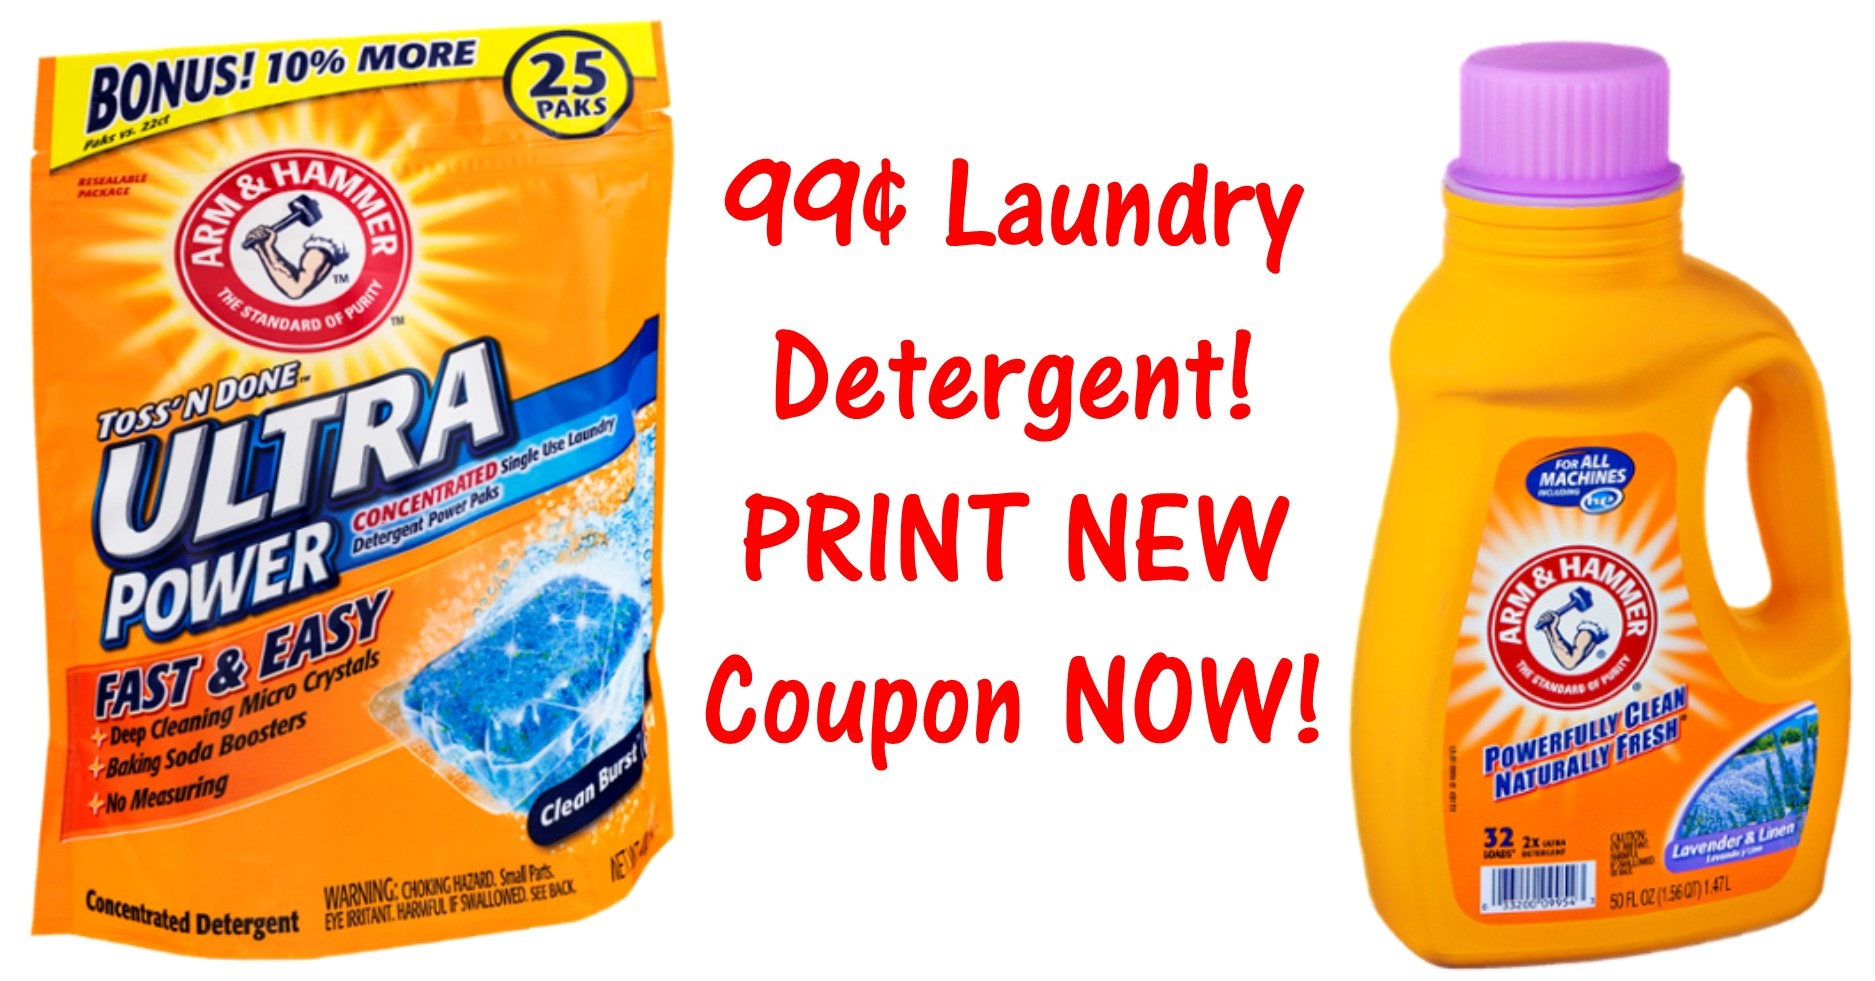 New Arm &amp;amp; Hammer Printable Coupons = $0.99 Laundry Detergent! - Free Printable Arm And Hammer Laundry Detergent Coupons